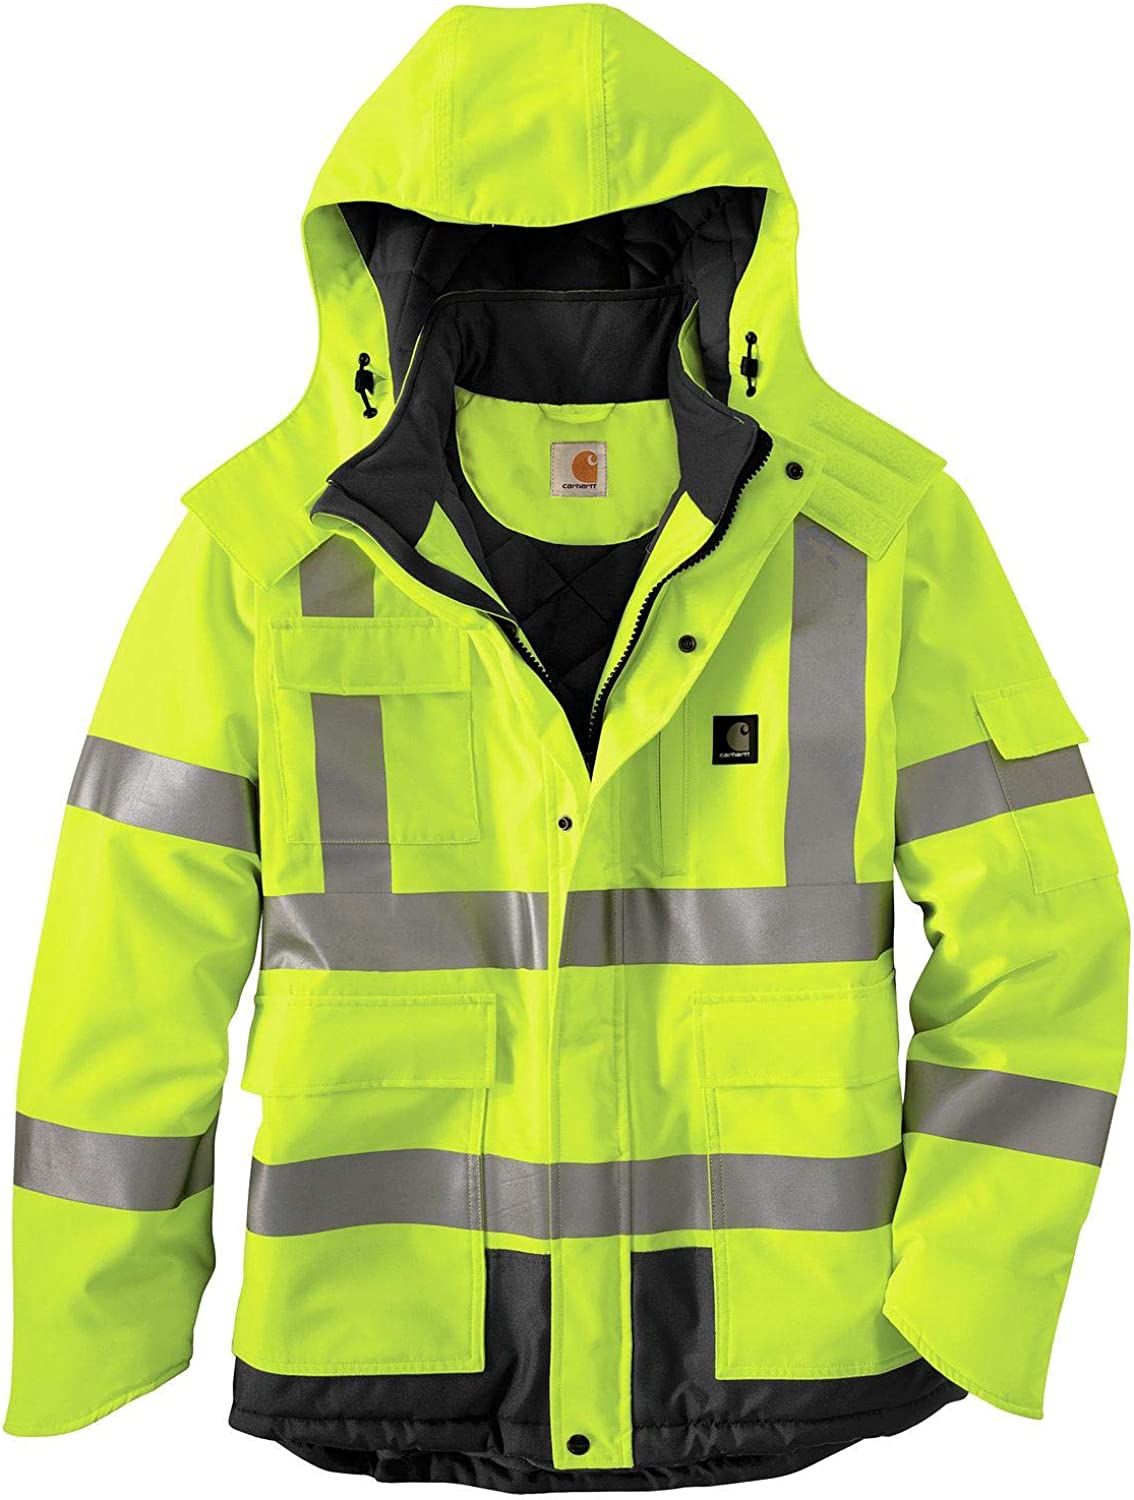  Mens High Visibility Jacket Waterproof with Hood